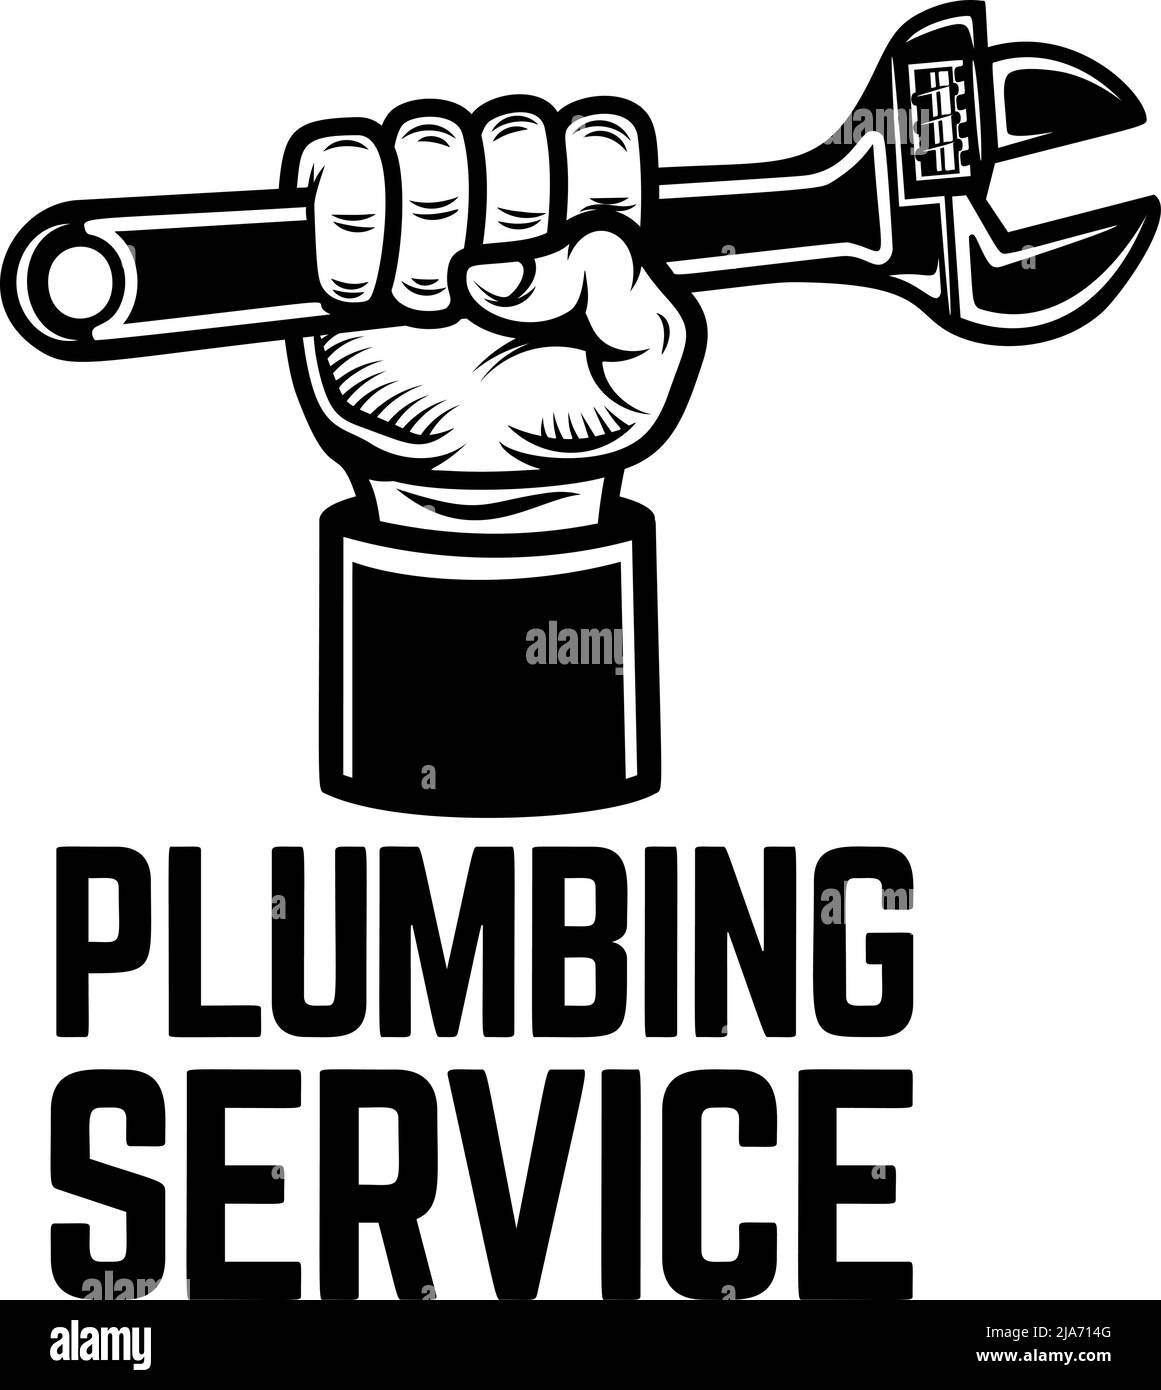 Plumbing service. Hand with plumbing wrench. Design element for logo, label, sign. Vector illustration Stock Vector